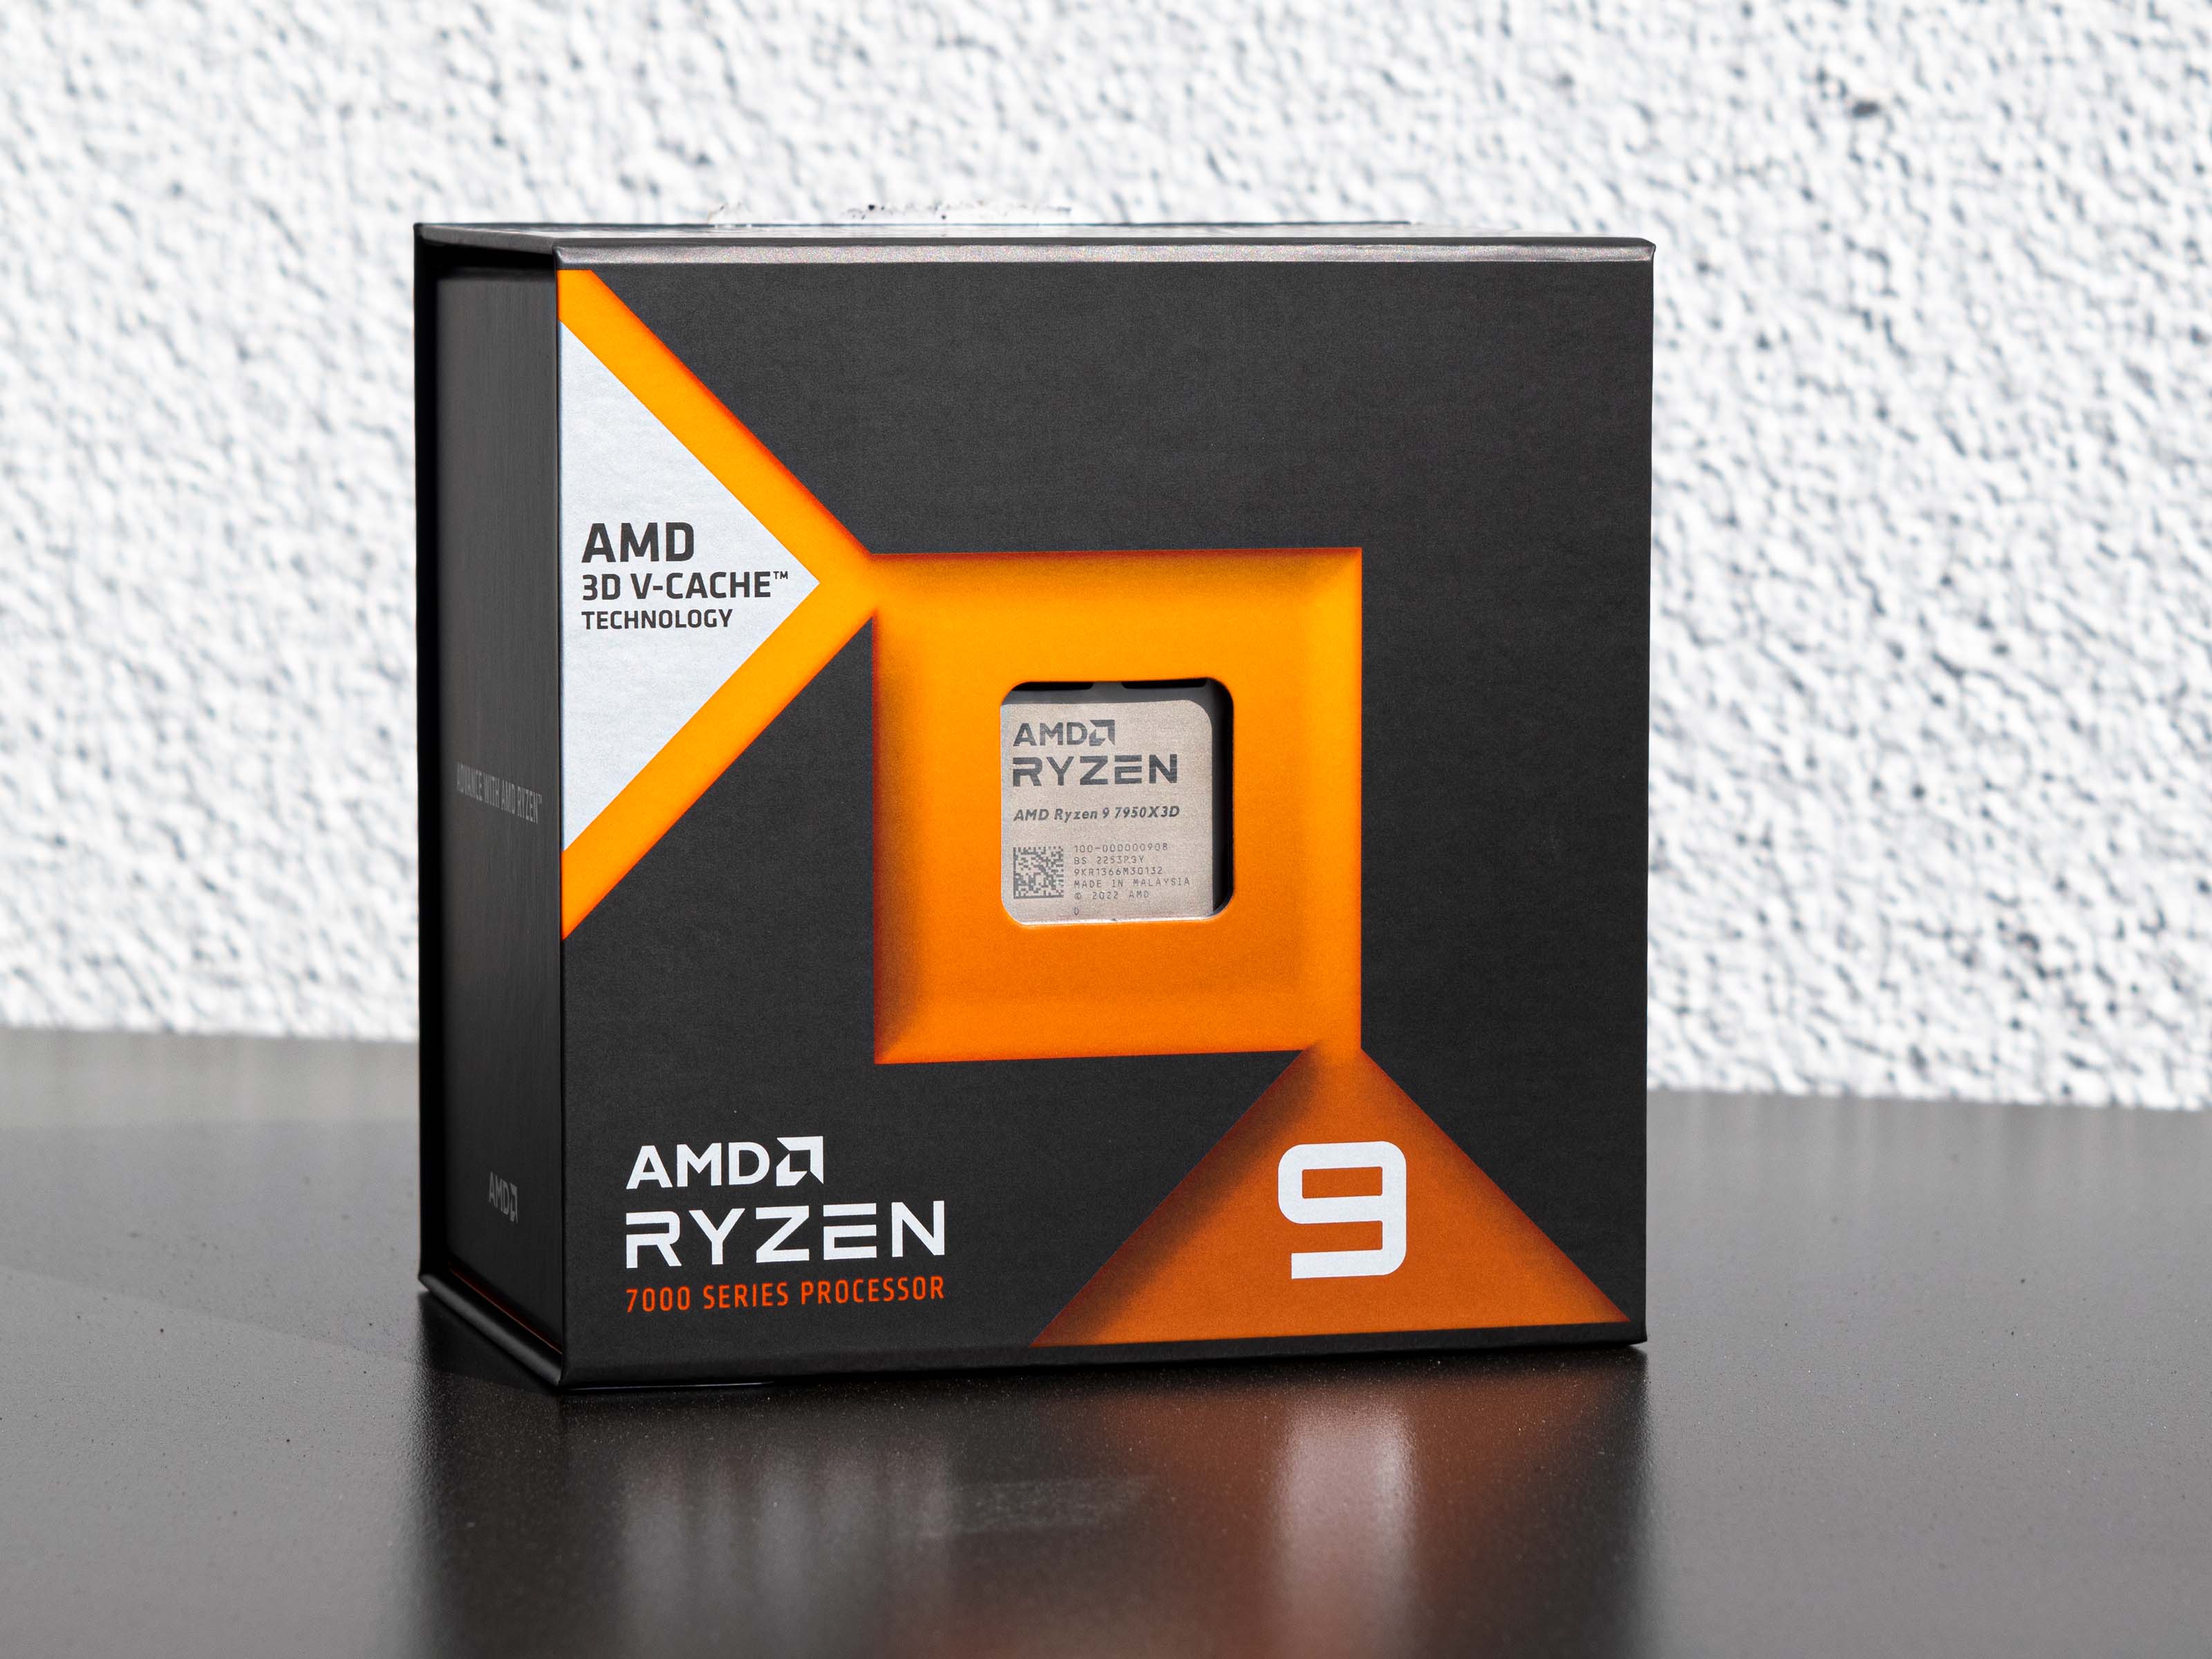 AMD's Ryzen 7000 mobile CPUs feature up to 16 cores and 5.4GHz speeds